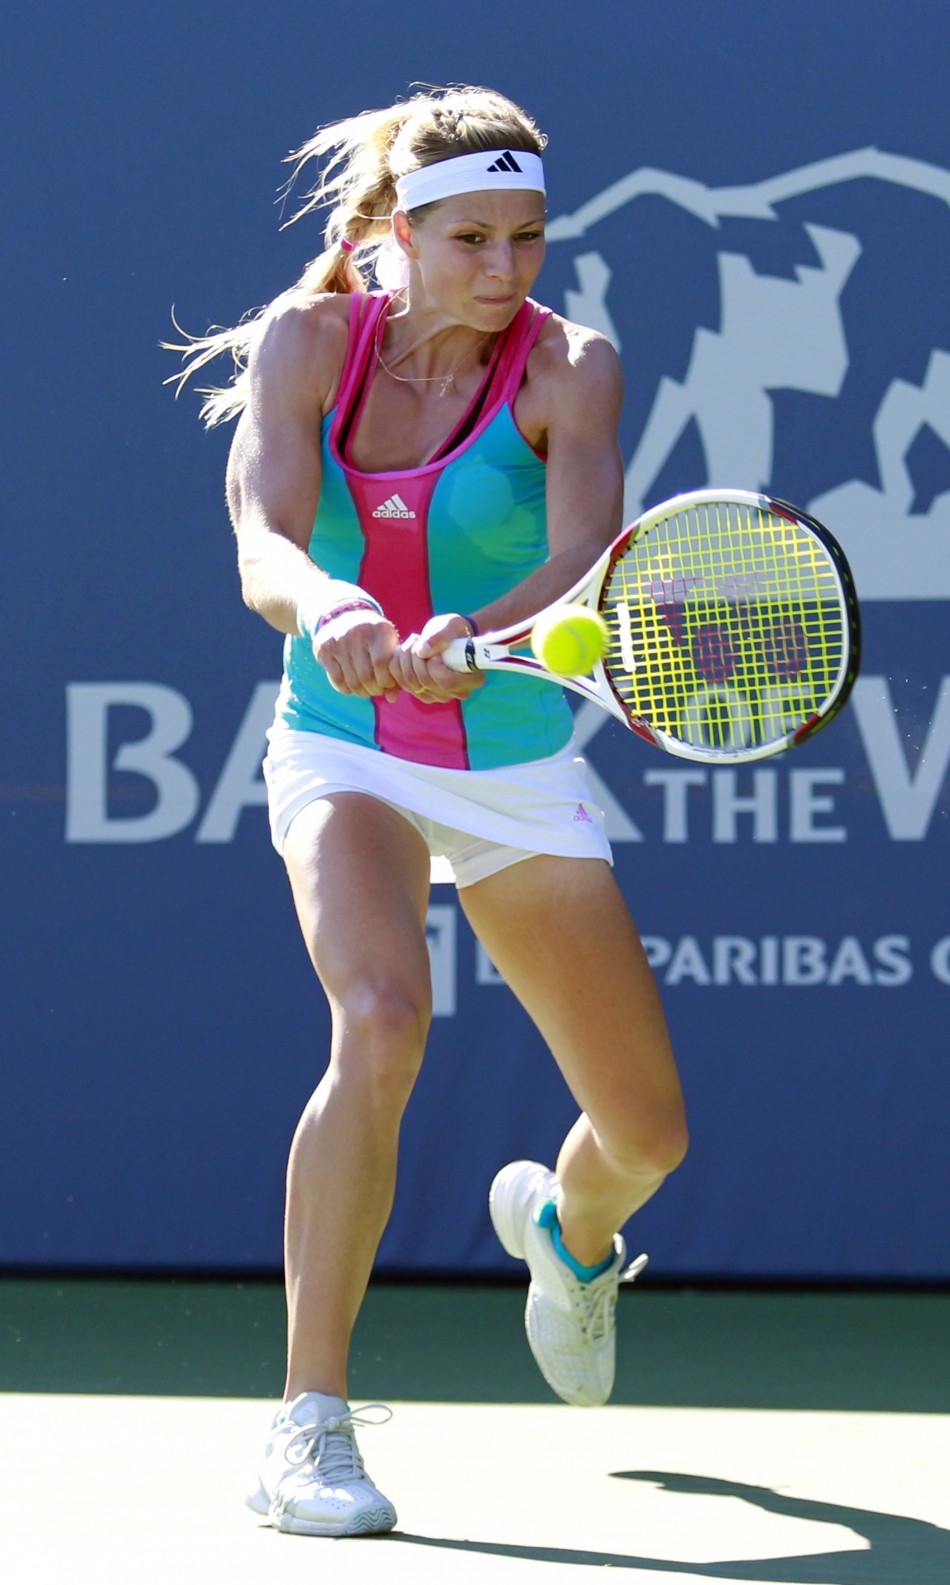 Maria Kirilenko is a Russian professional tennis player who marked her first WTA Tour title in 2005, beating Anna-Lena Groenefeld in the China Open.